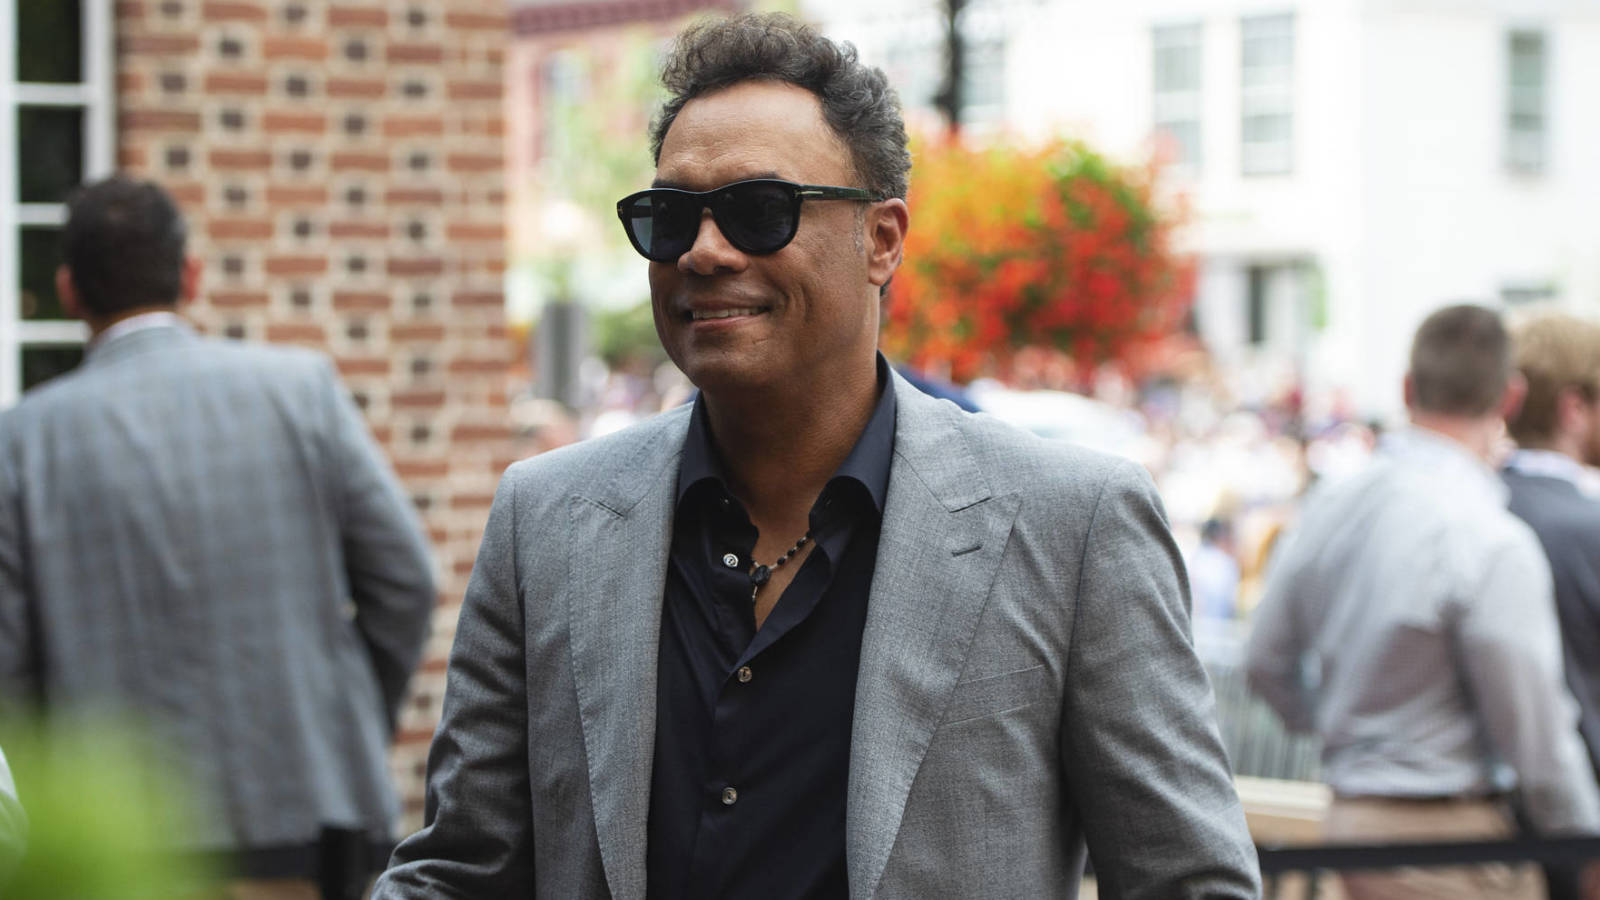 Hall of Famer Roberto Alomar placed on MLB ineligible list after sexual misconduct allegation